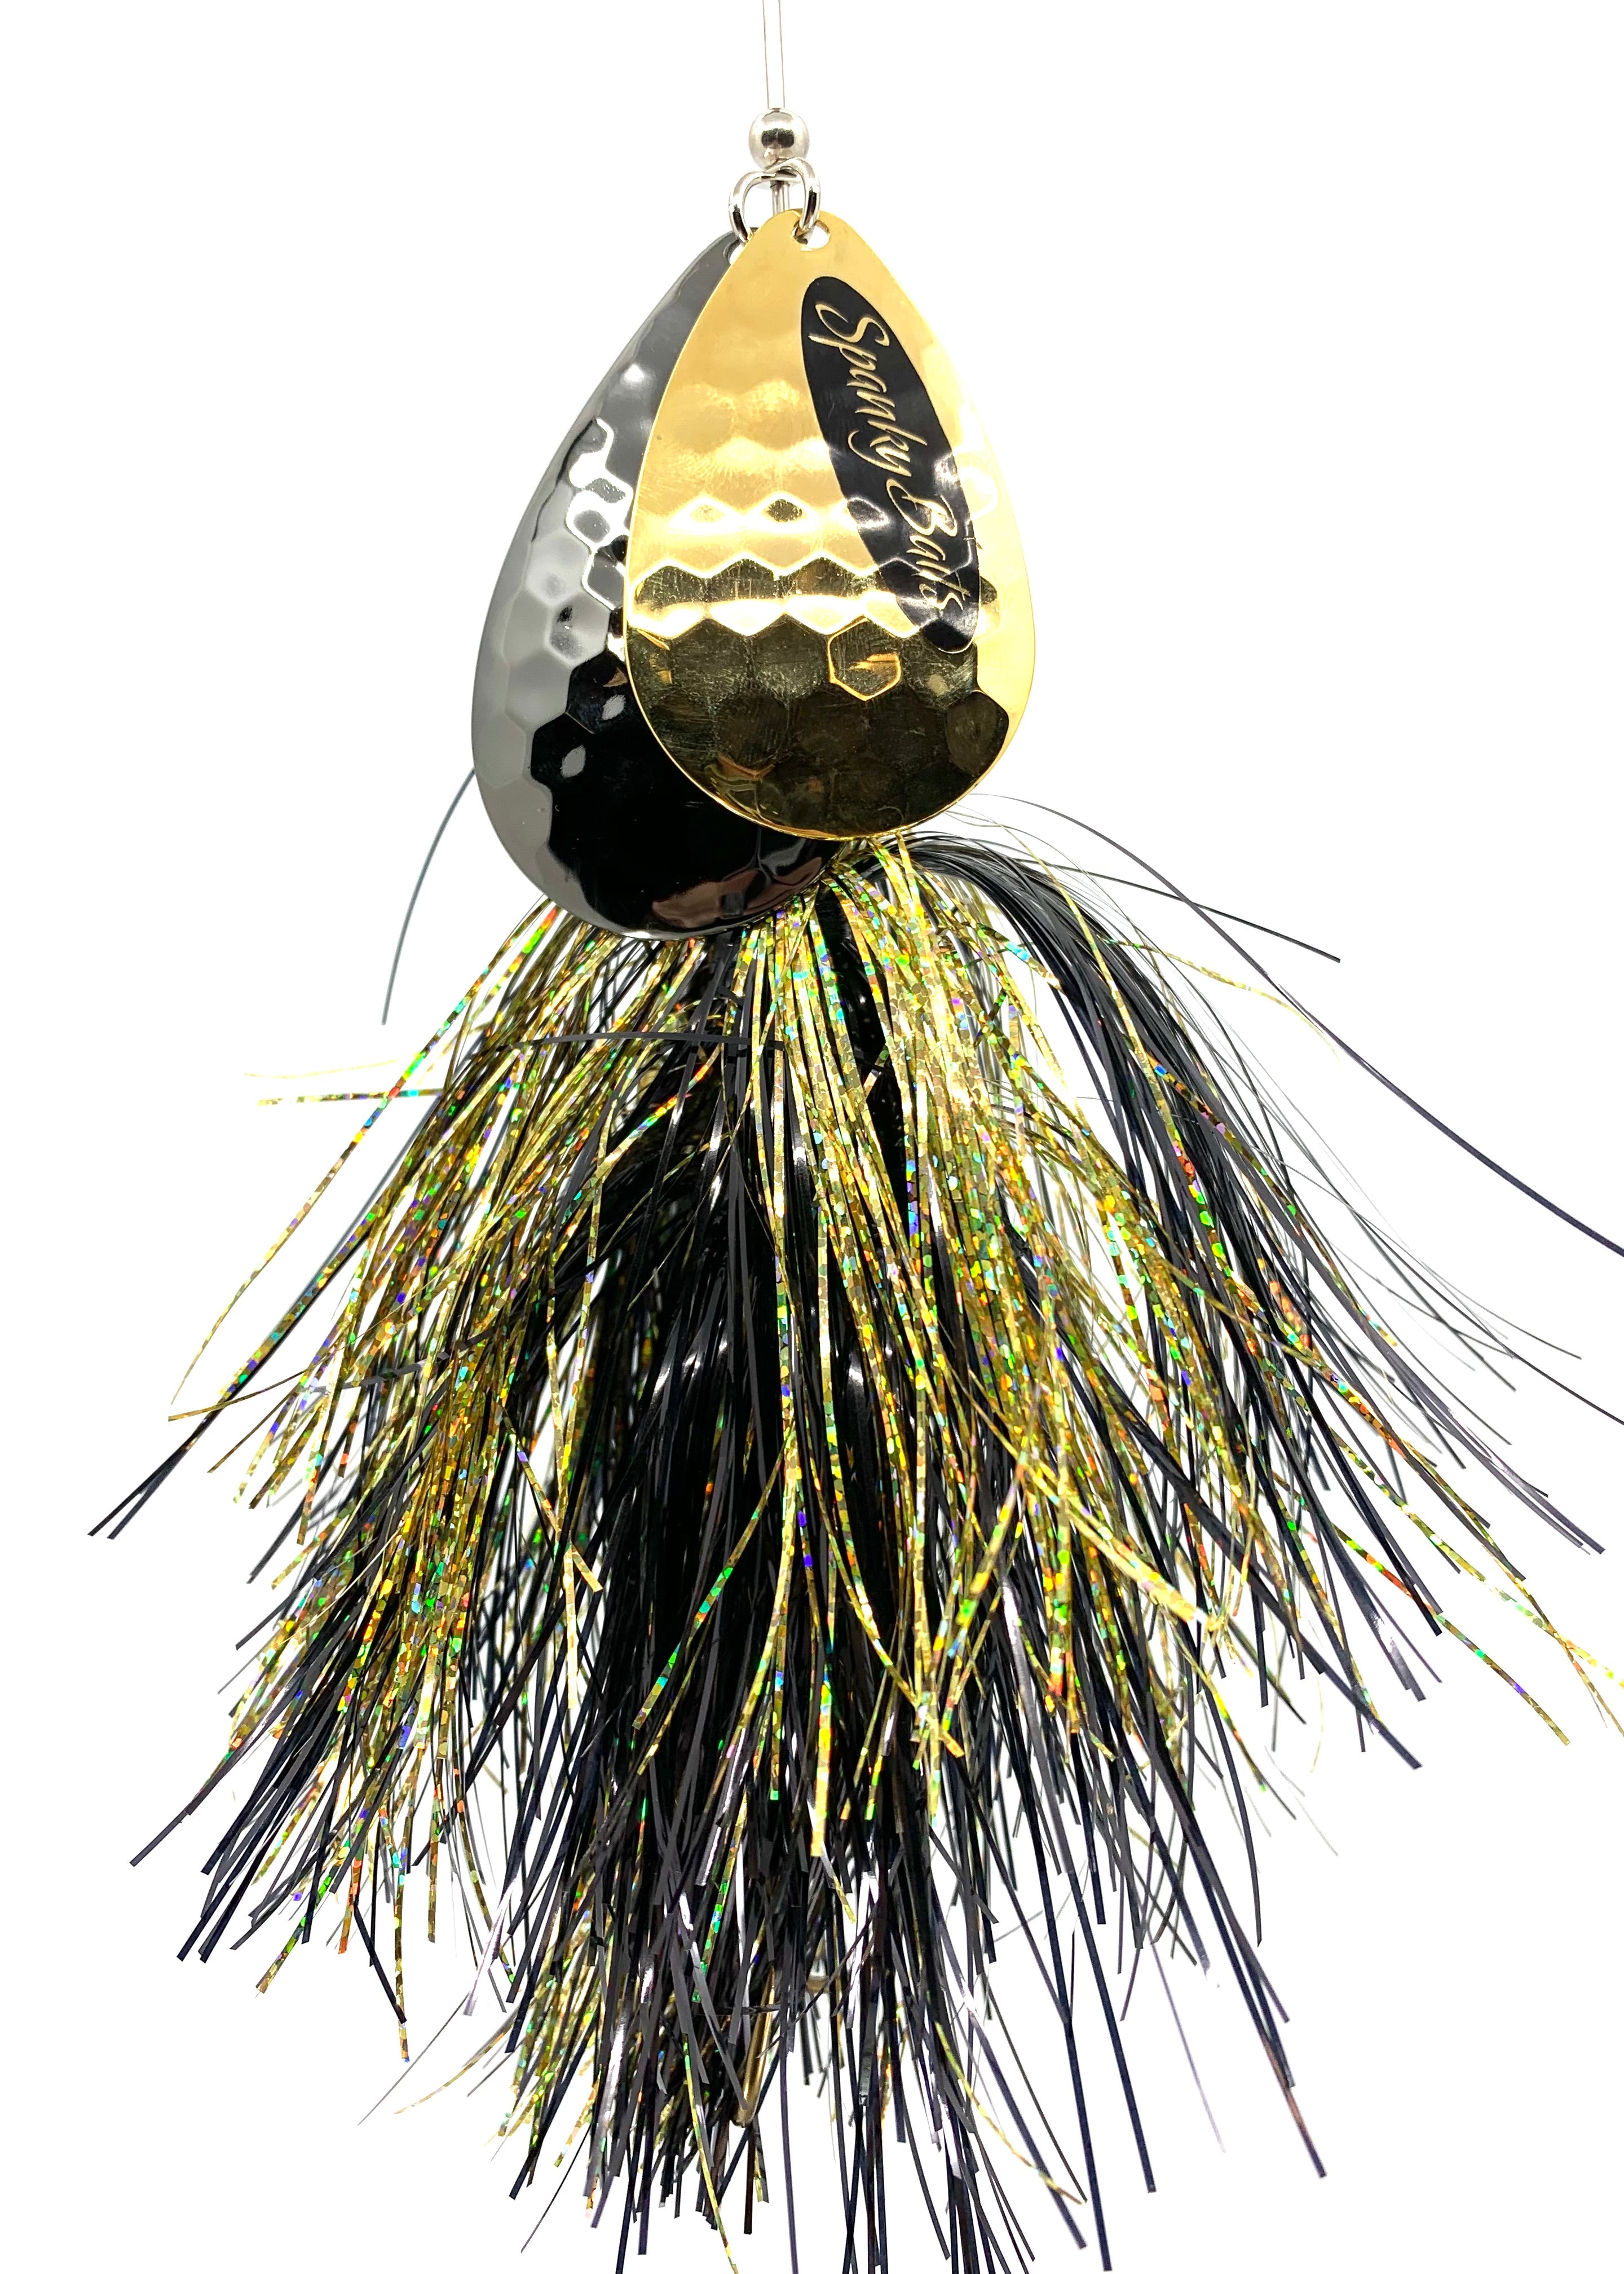 Spanky Baits - Spanky Baits bucktail muskie lures for musky and northern  pike fishing.